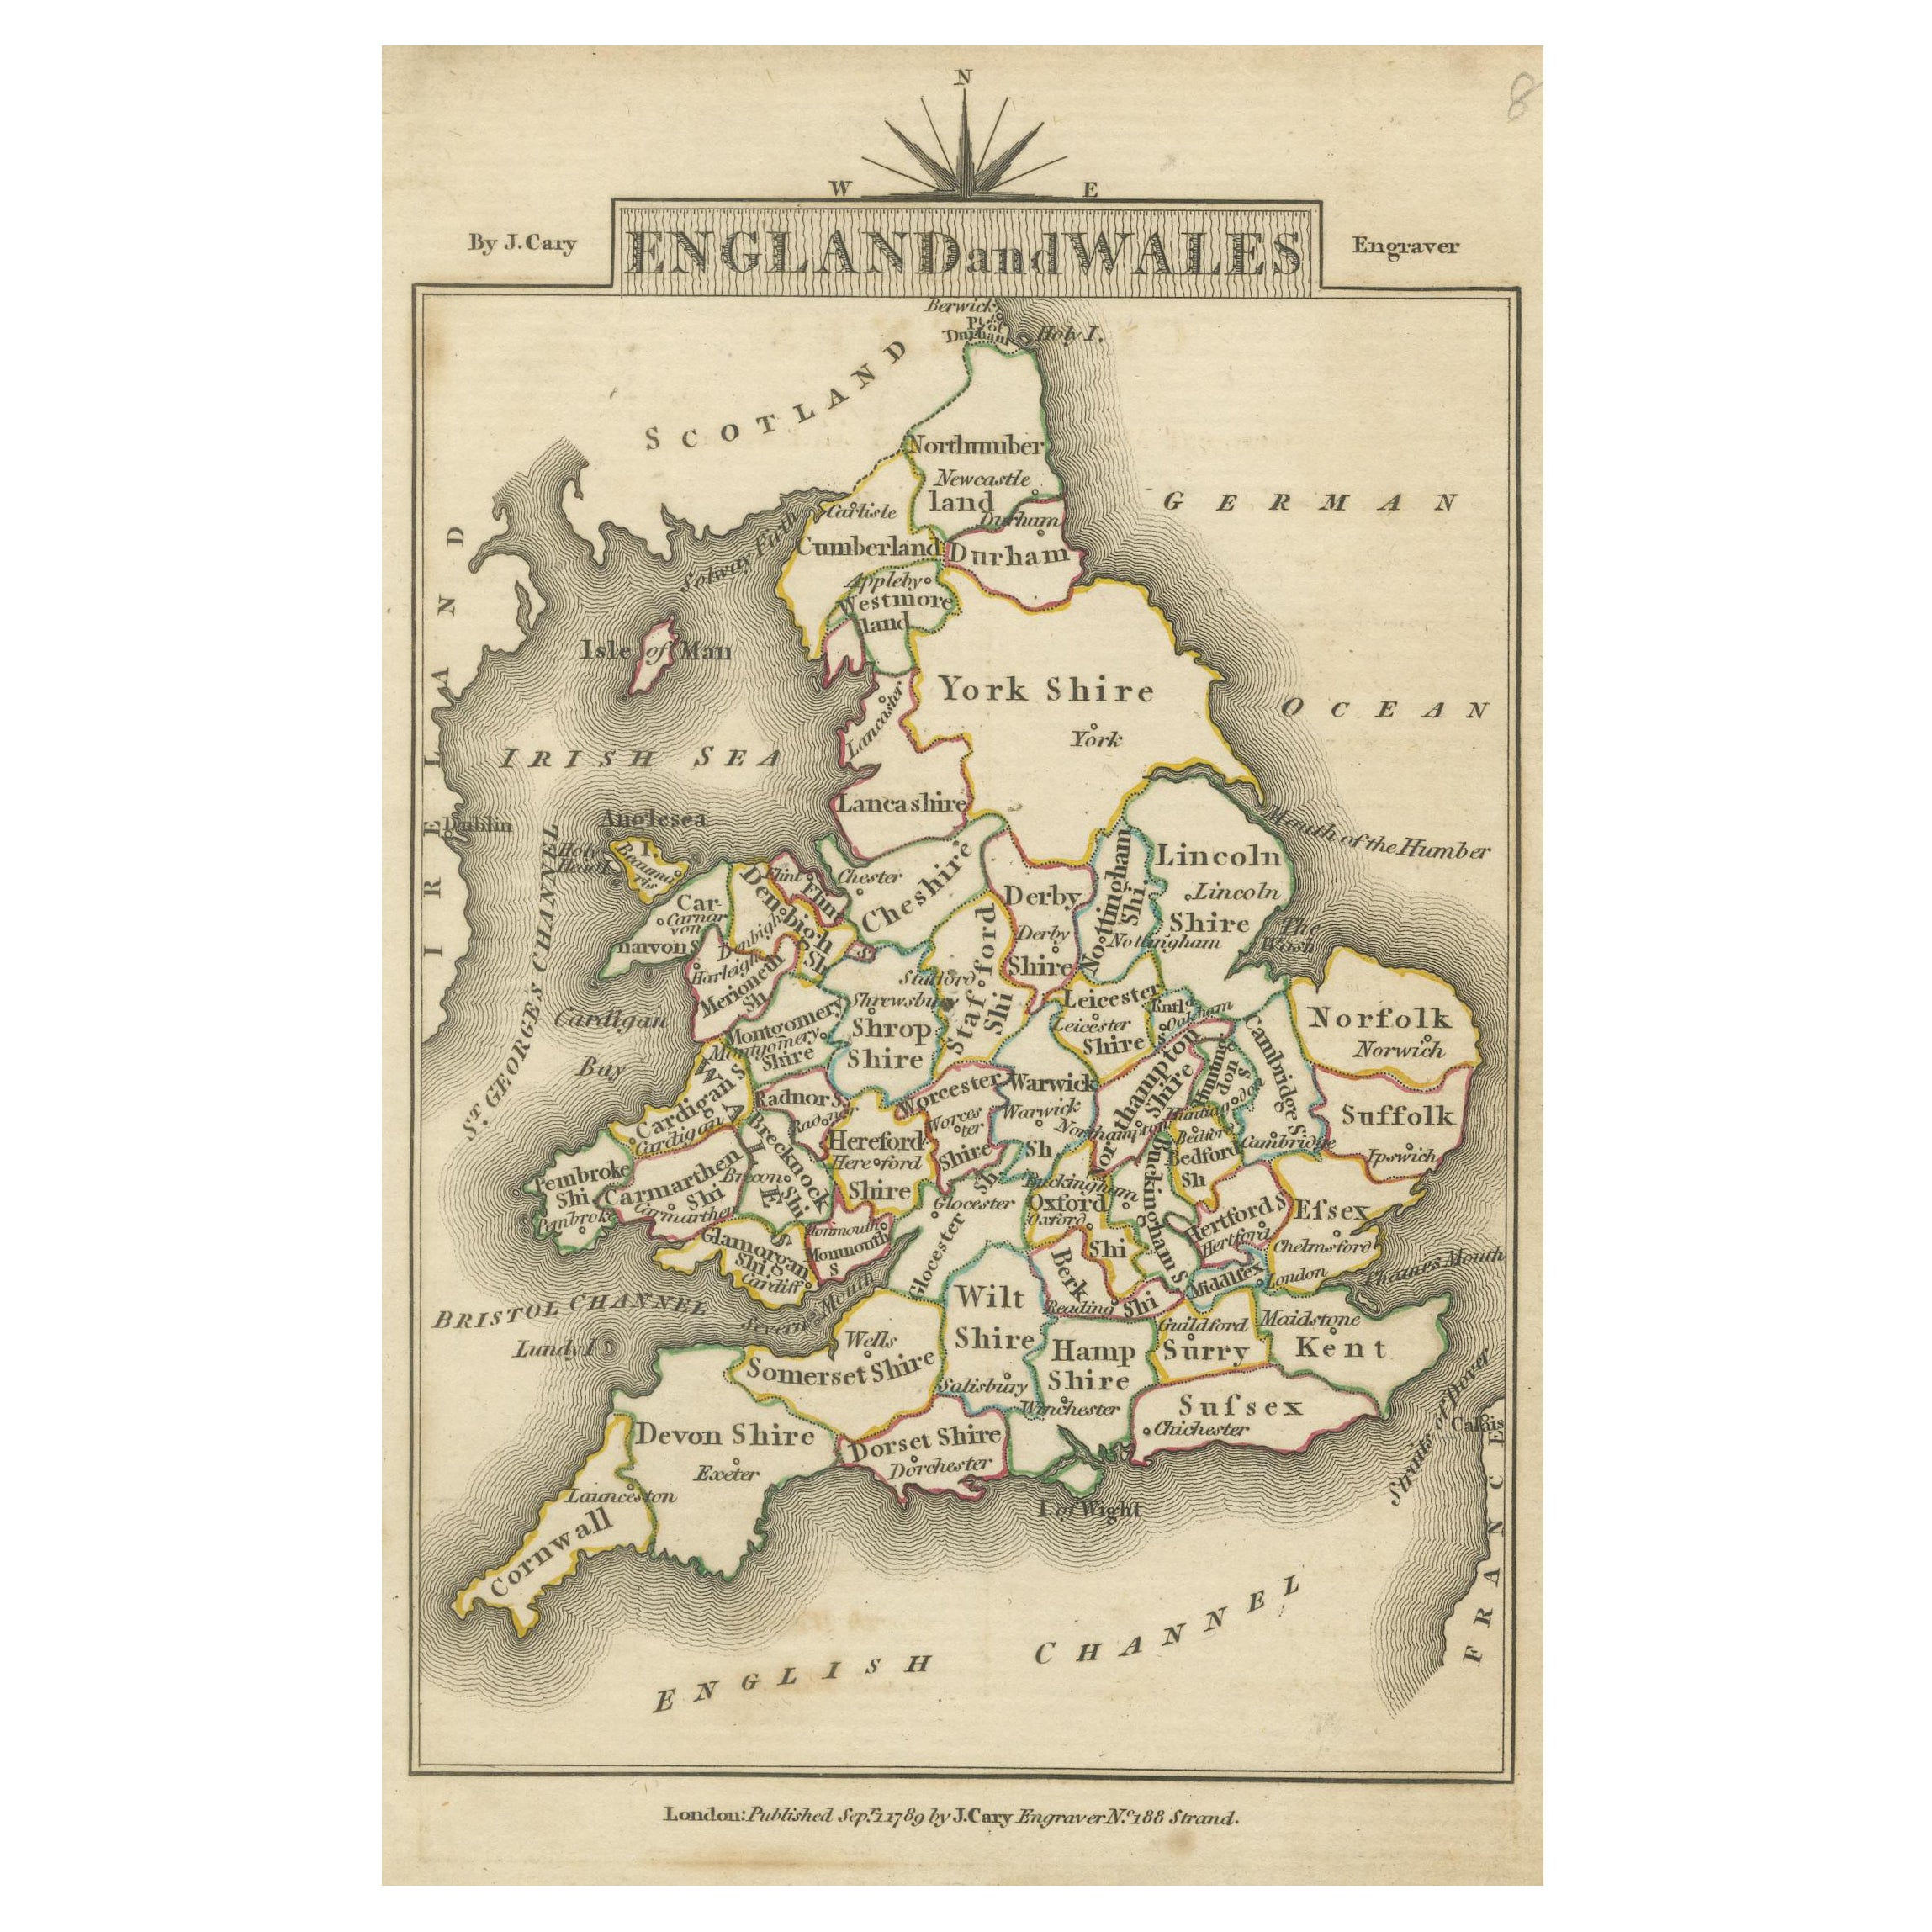 Miniature Map of England and Wales with Hand Coloring